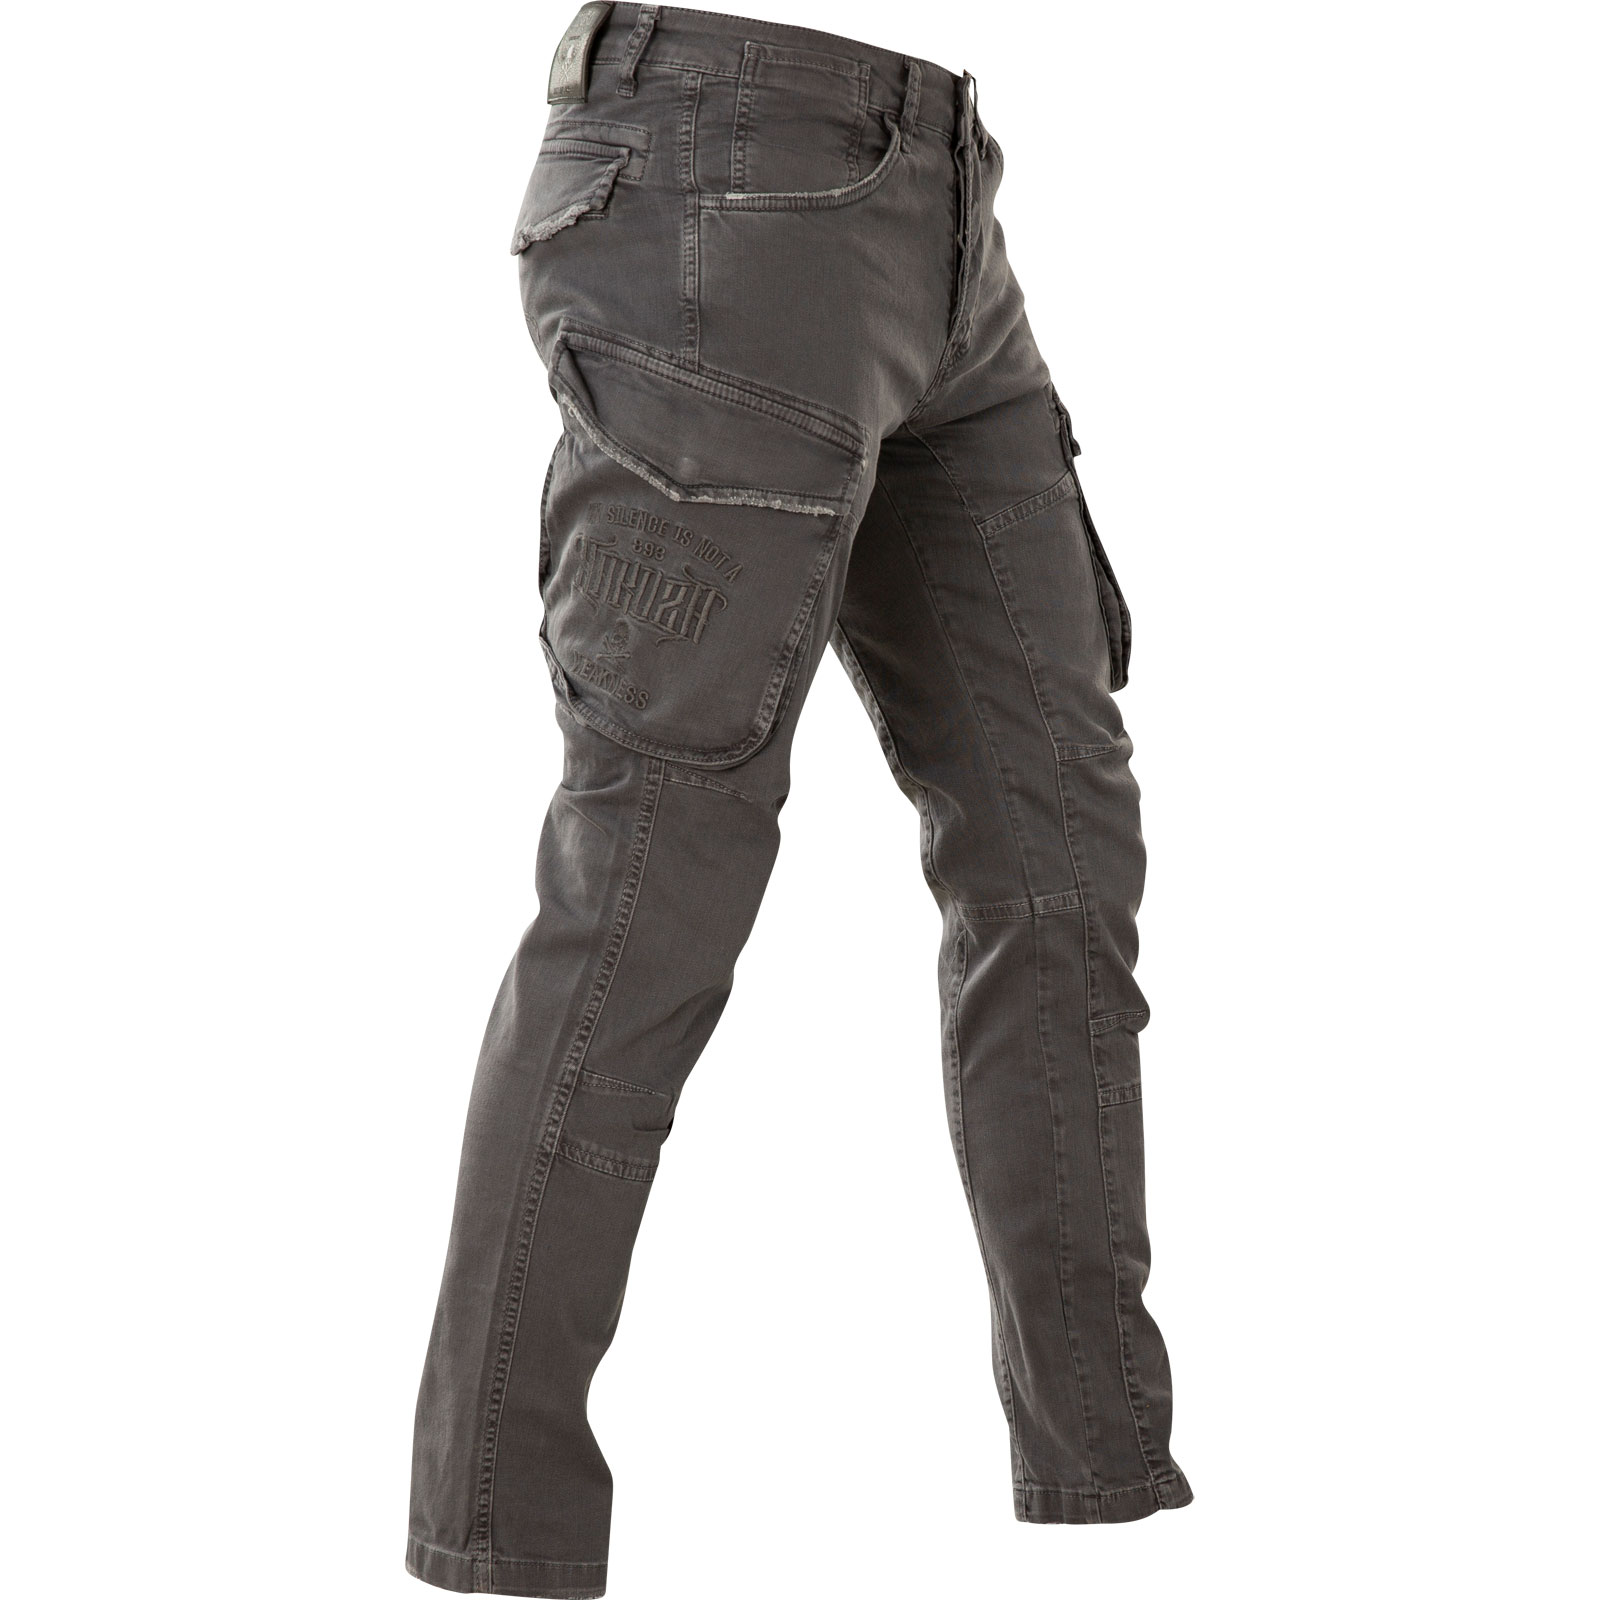 Yakuza Core Cargo Pants CPB-15010 in grey with logo embroidery